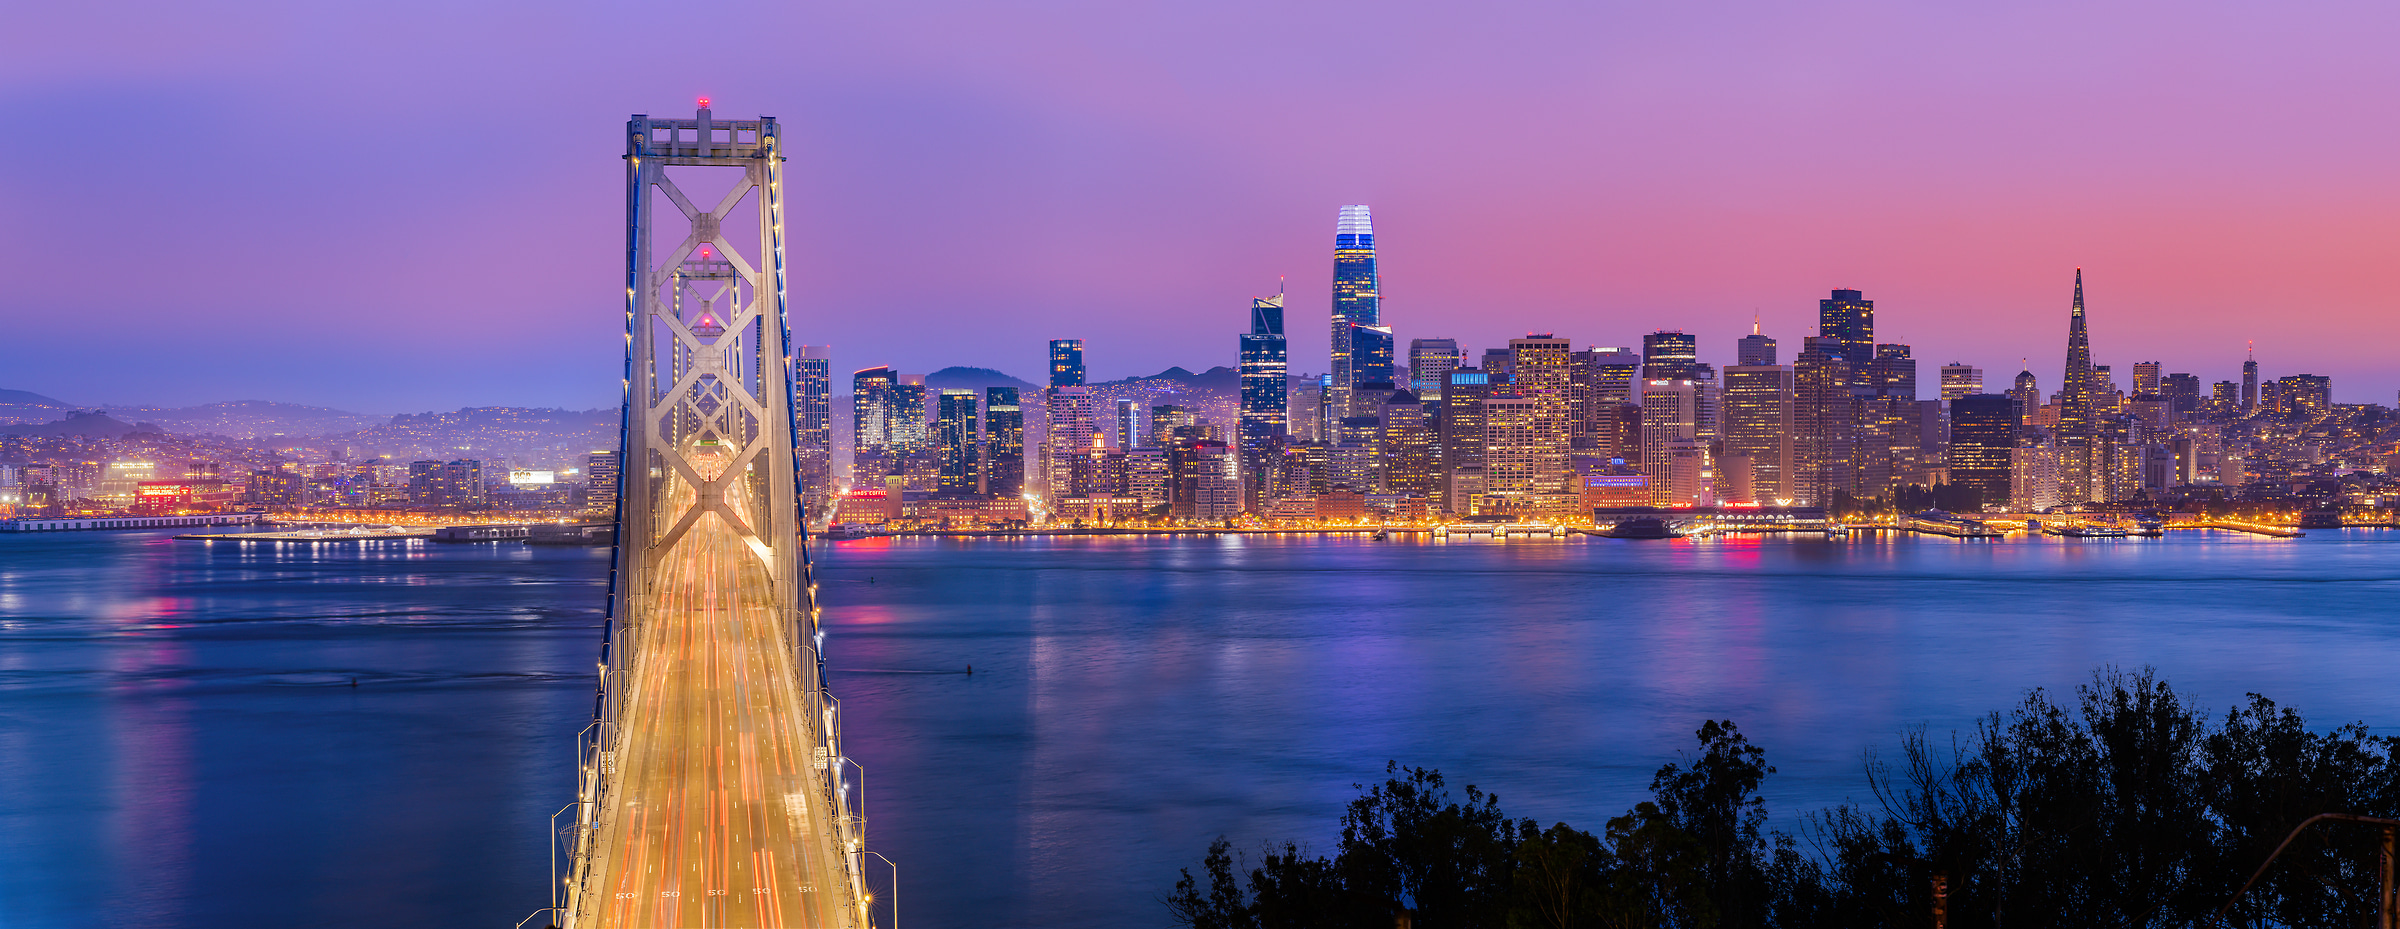 262 megapixels! A very high resolution, large-format VAST photo print of the San Francisco skyline and the San Francisco Bay Bridge at sunset; cityscape photograph created by Chris Blake in Treasure Island, San Francisco